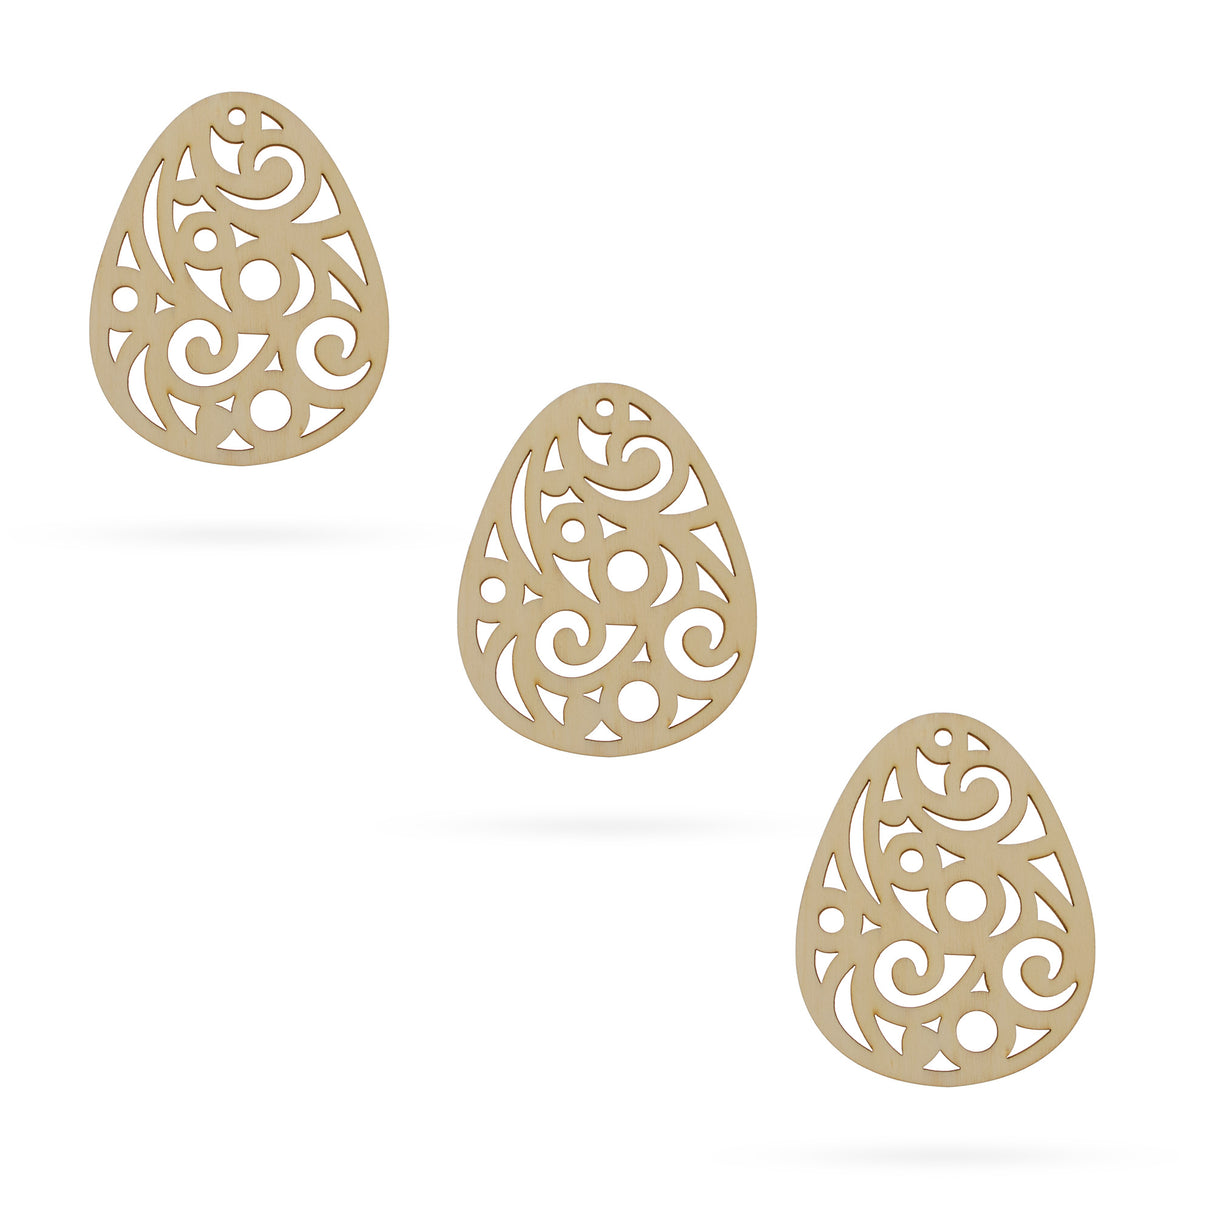 Wood 3 Eggs Unfinished Wooden Shapes Craft Cutouts DIY Unpainted 3D Plaques 4 Inches in Beige color